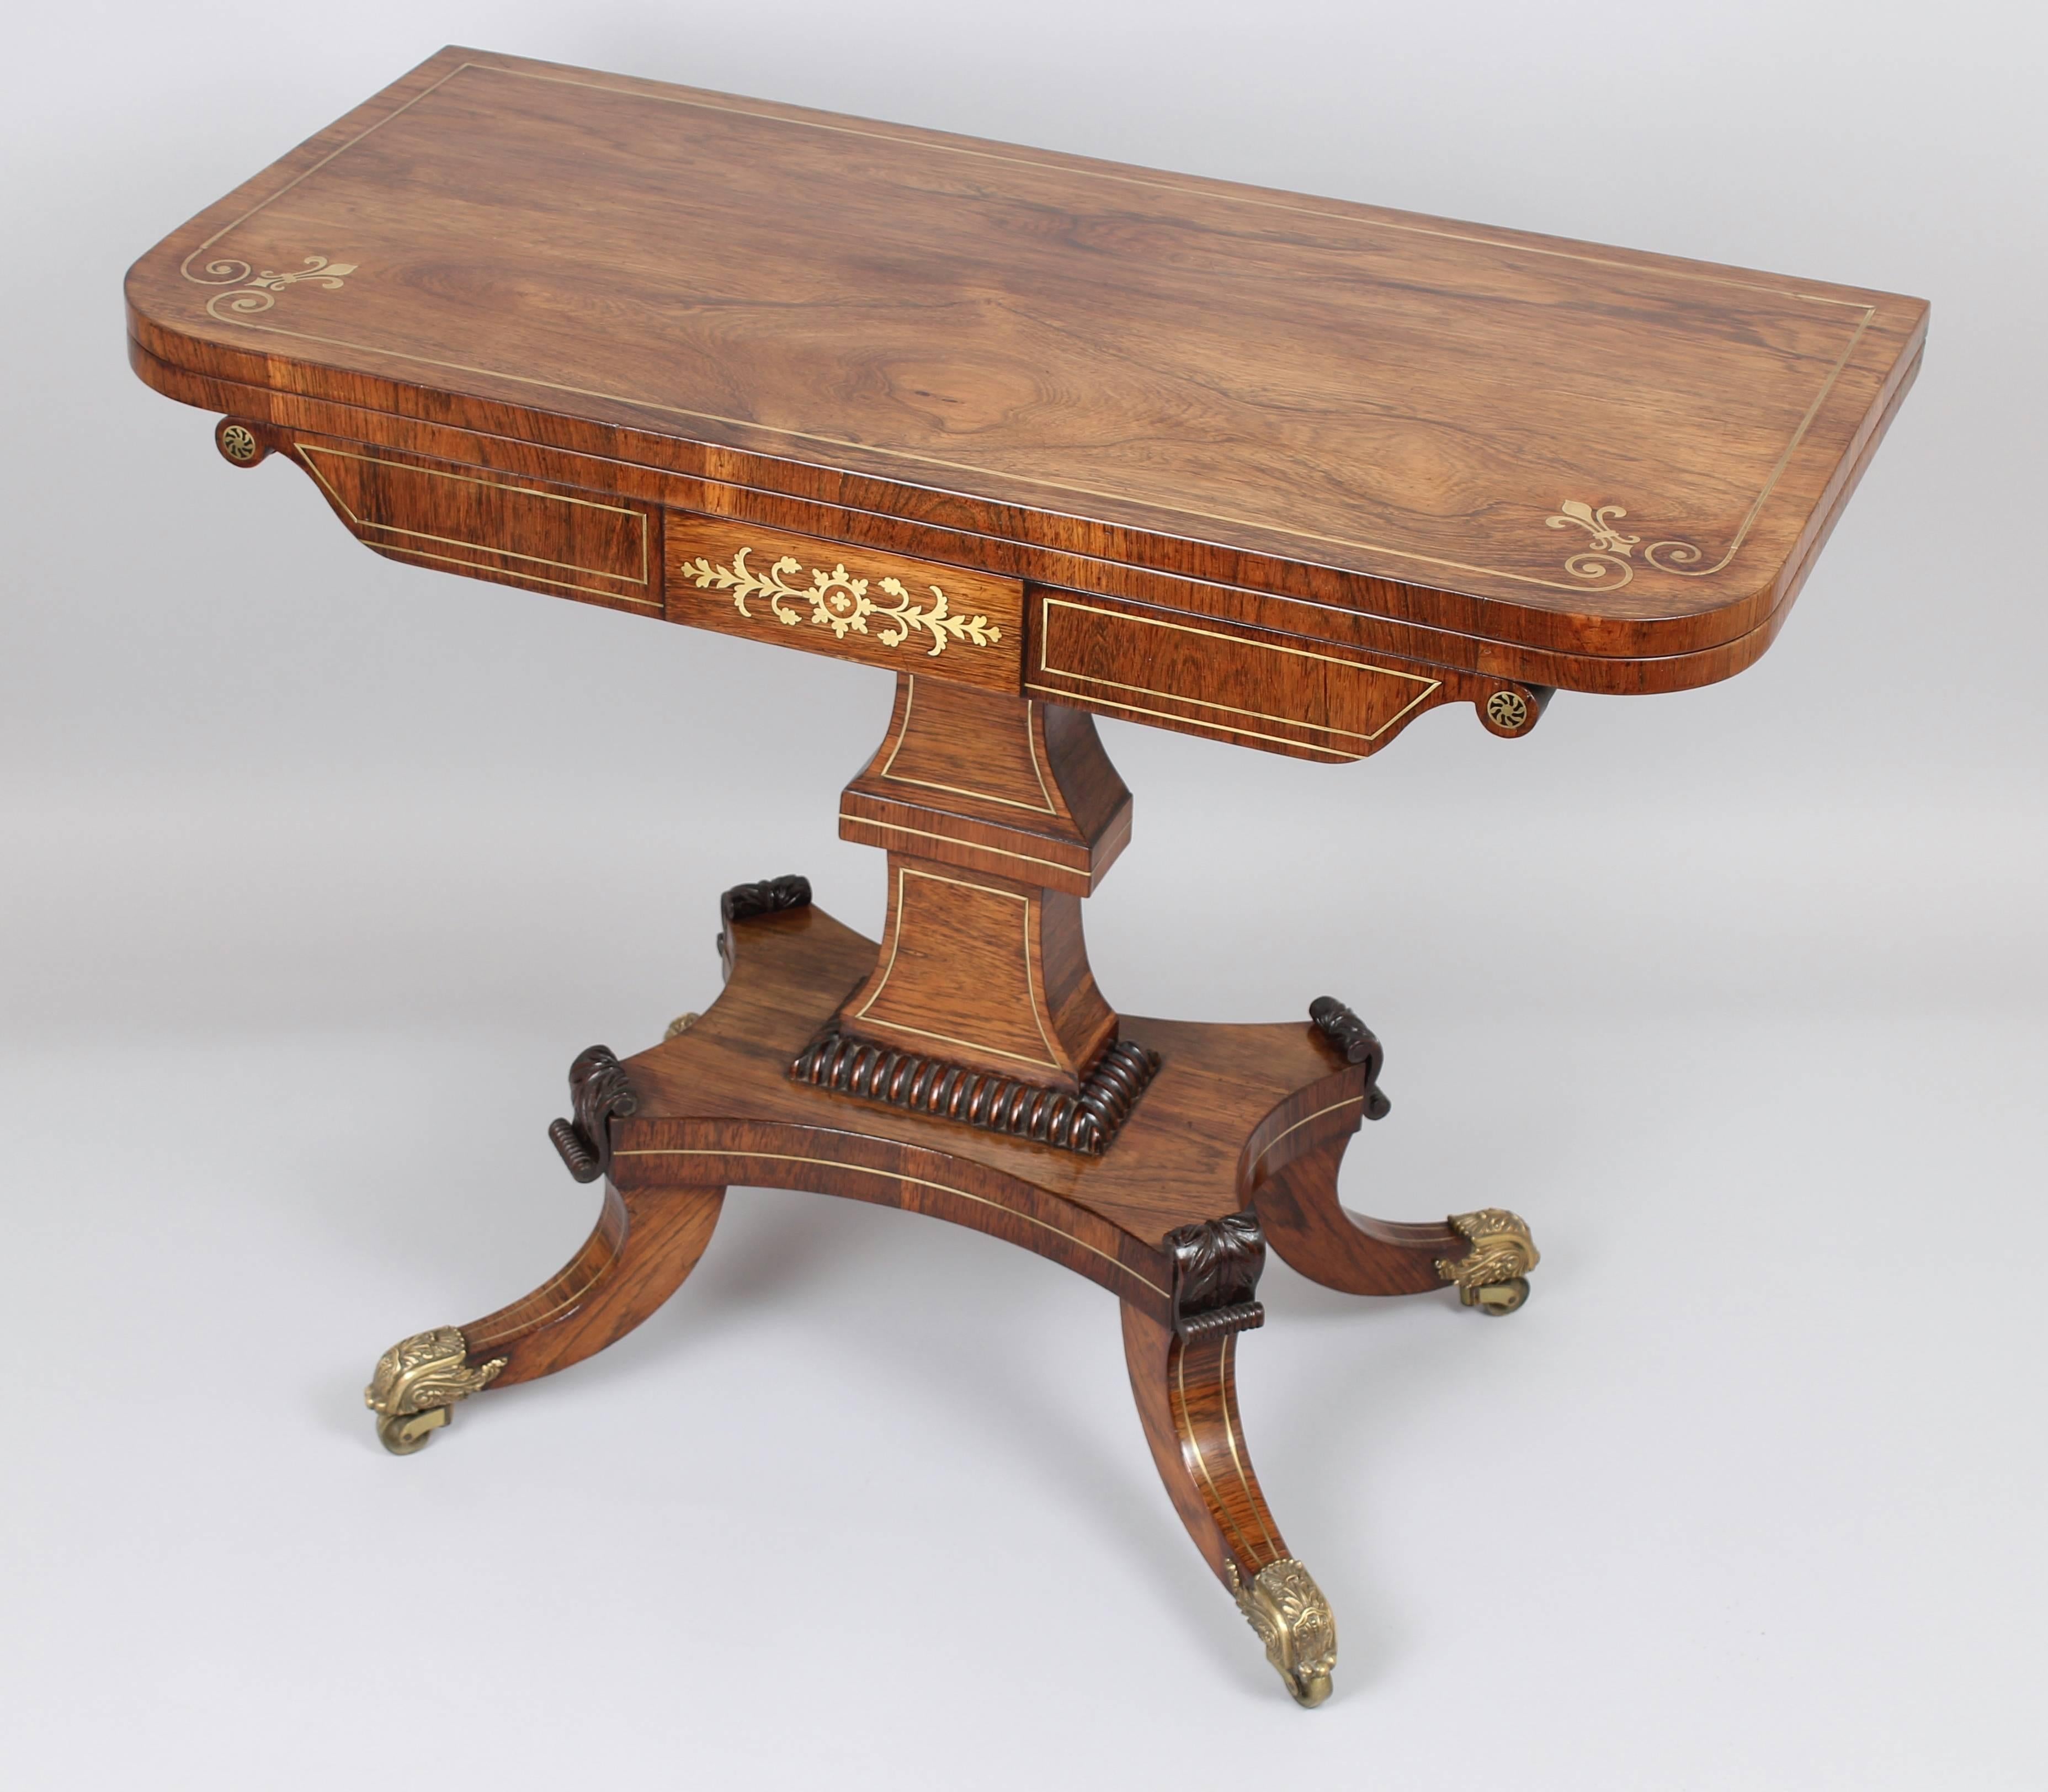 Fine quality Regency rosewood and brass inlaid card-table of mellow golden colour; the hinged and swivelling top inlaid with brass lines and fleur-de-lys; on a shaped frieze with cut-brass scrollwork and paterae; on an elaborate double-blocked shaft